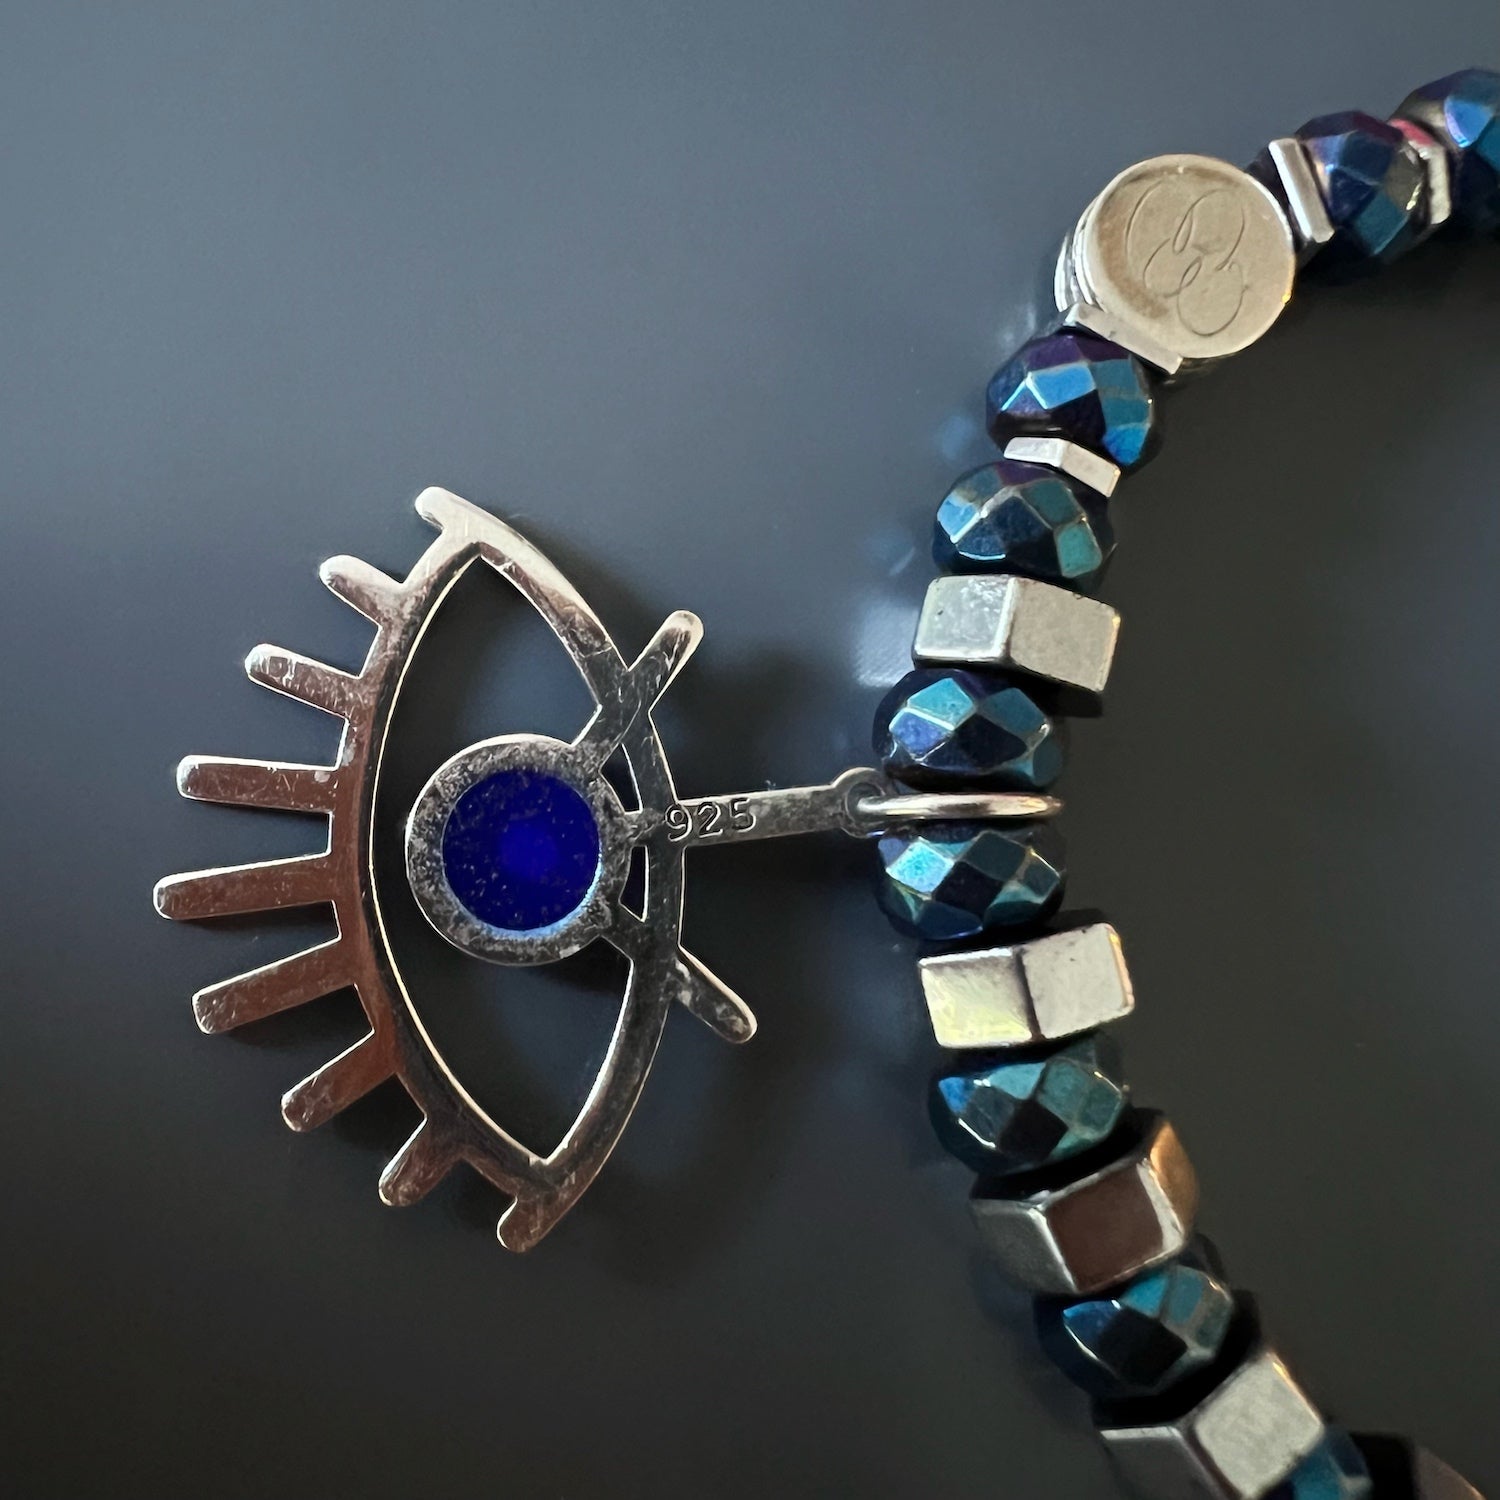 Wear the Nazar Bracelet as a symbol of luck and protection, with its eye-catching sterling silver evil eye charm.